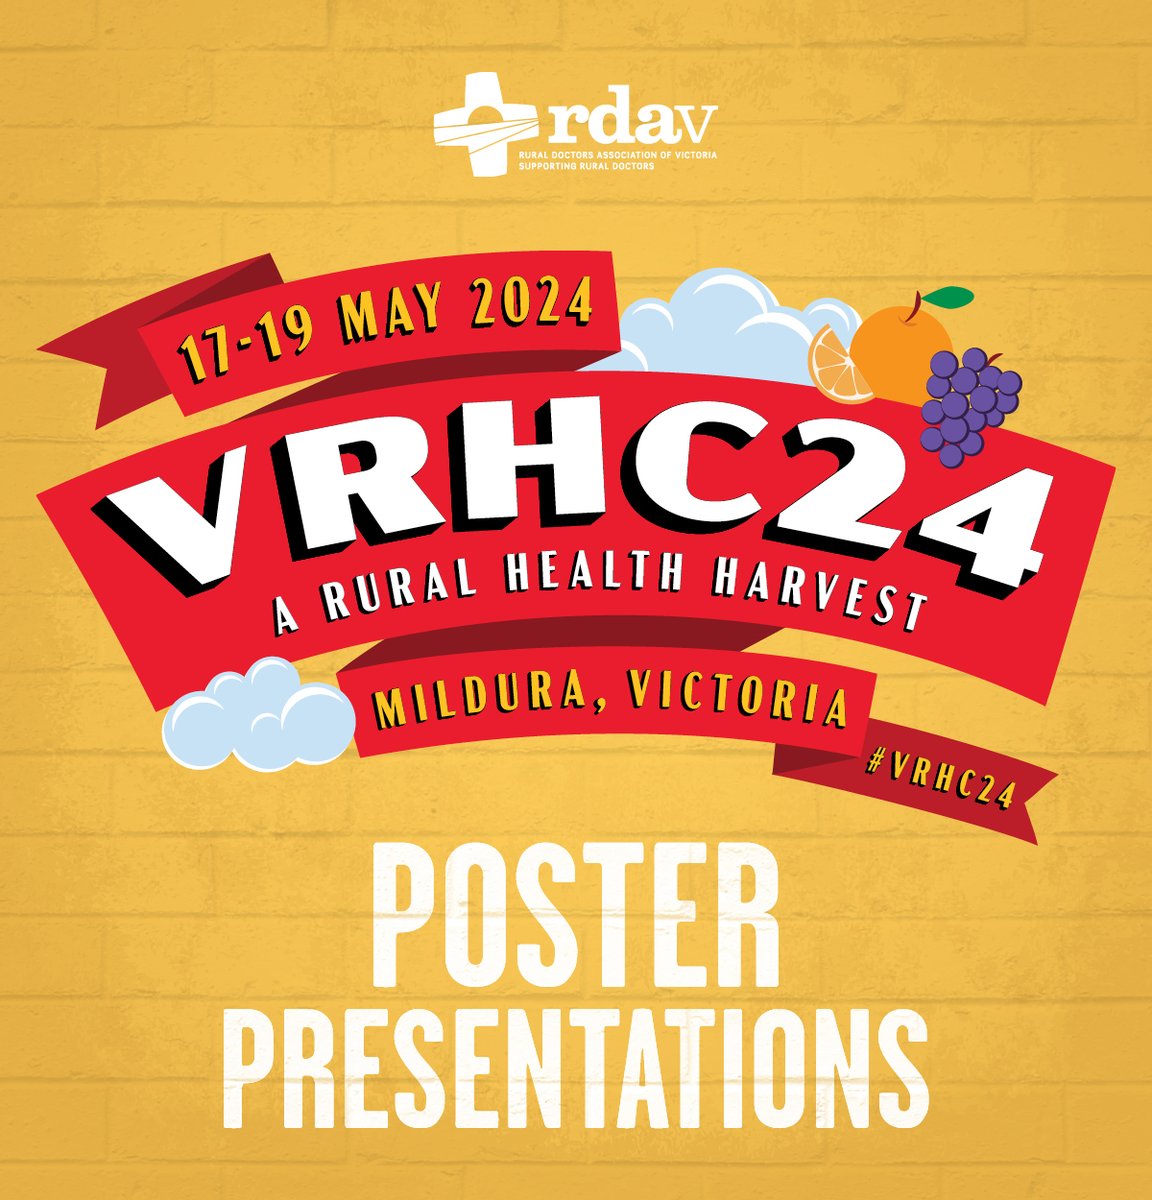 Last call for Poster Presentations EOIs for the upcoming Victorian Rural Health Conference 2024. Prizes will be awarded as voted by delegates & expert panel. Due today - find out more bit.ly/476kxt4